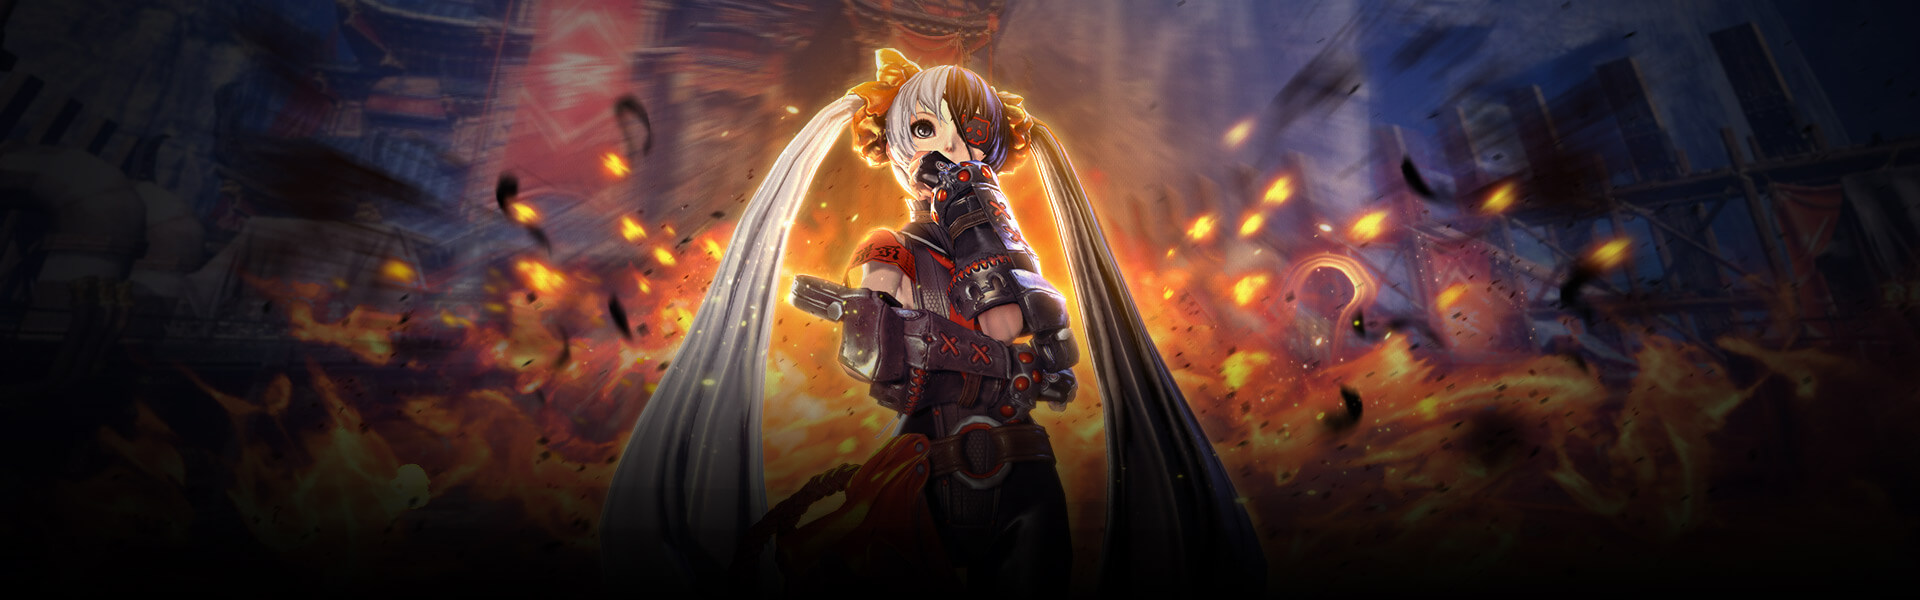 Blade and Soul: Einlogg-Probleme am 23.1.